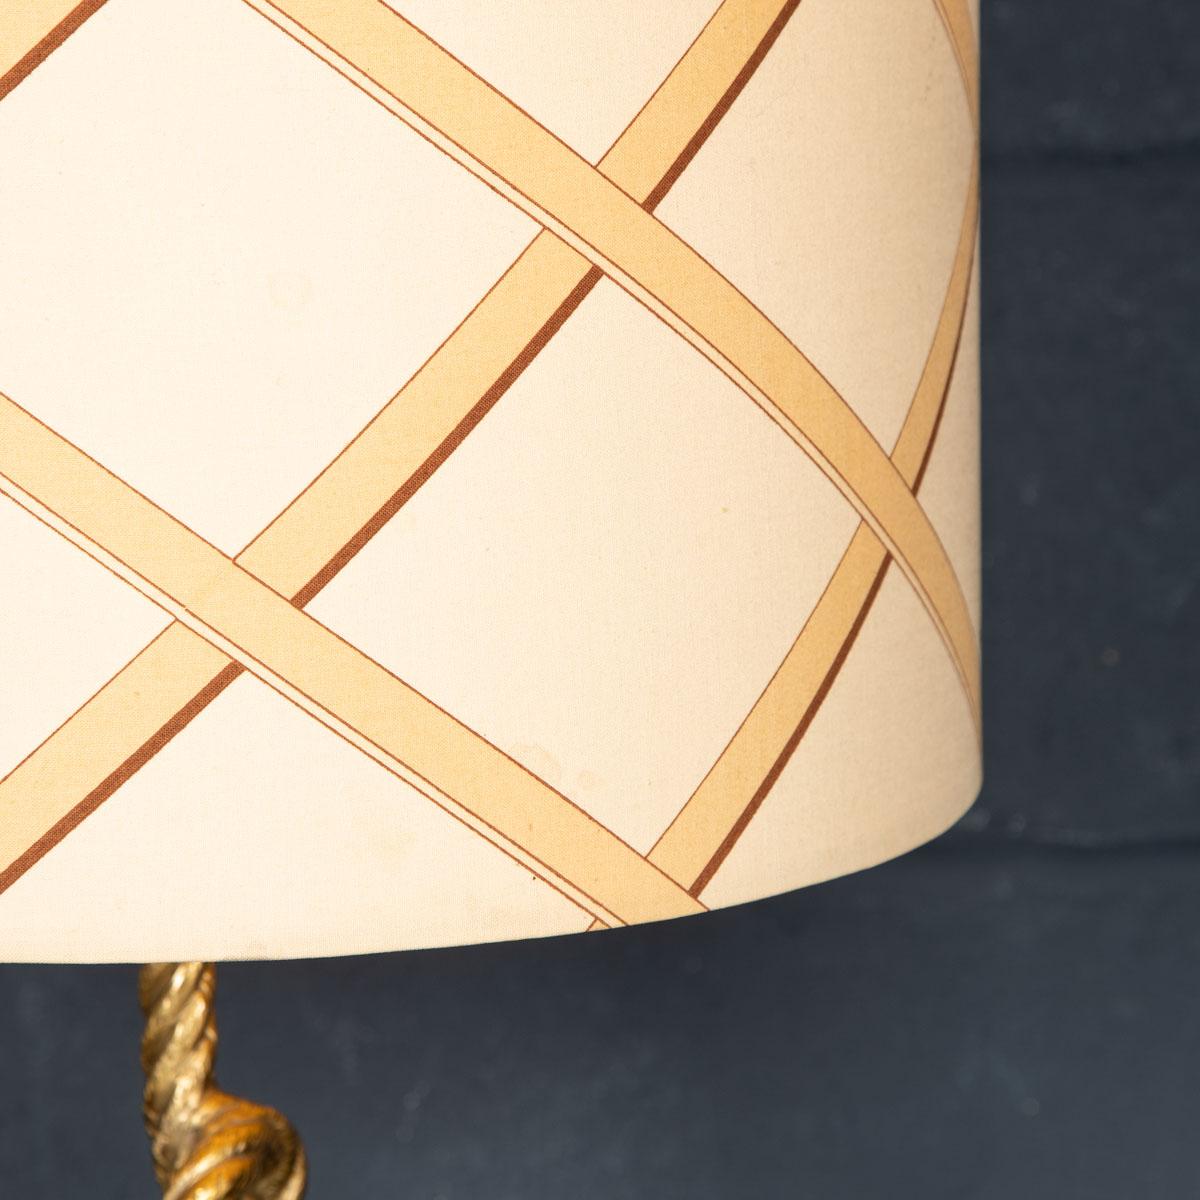 20th Century Large Table Lamp with Original Shade Attributable to Gucci, c.1980 For Sale 3